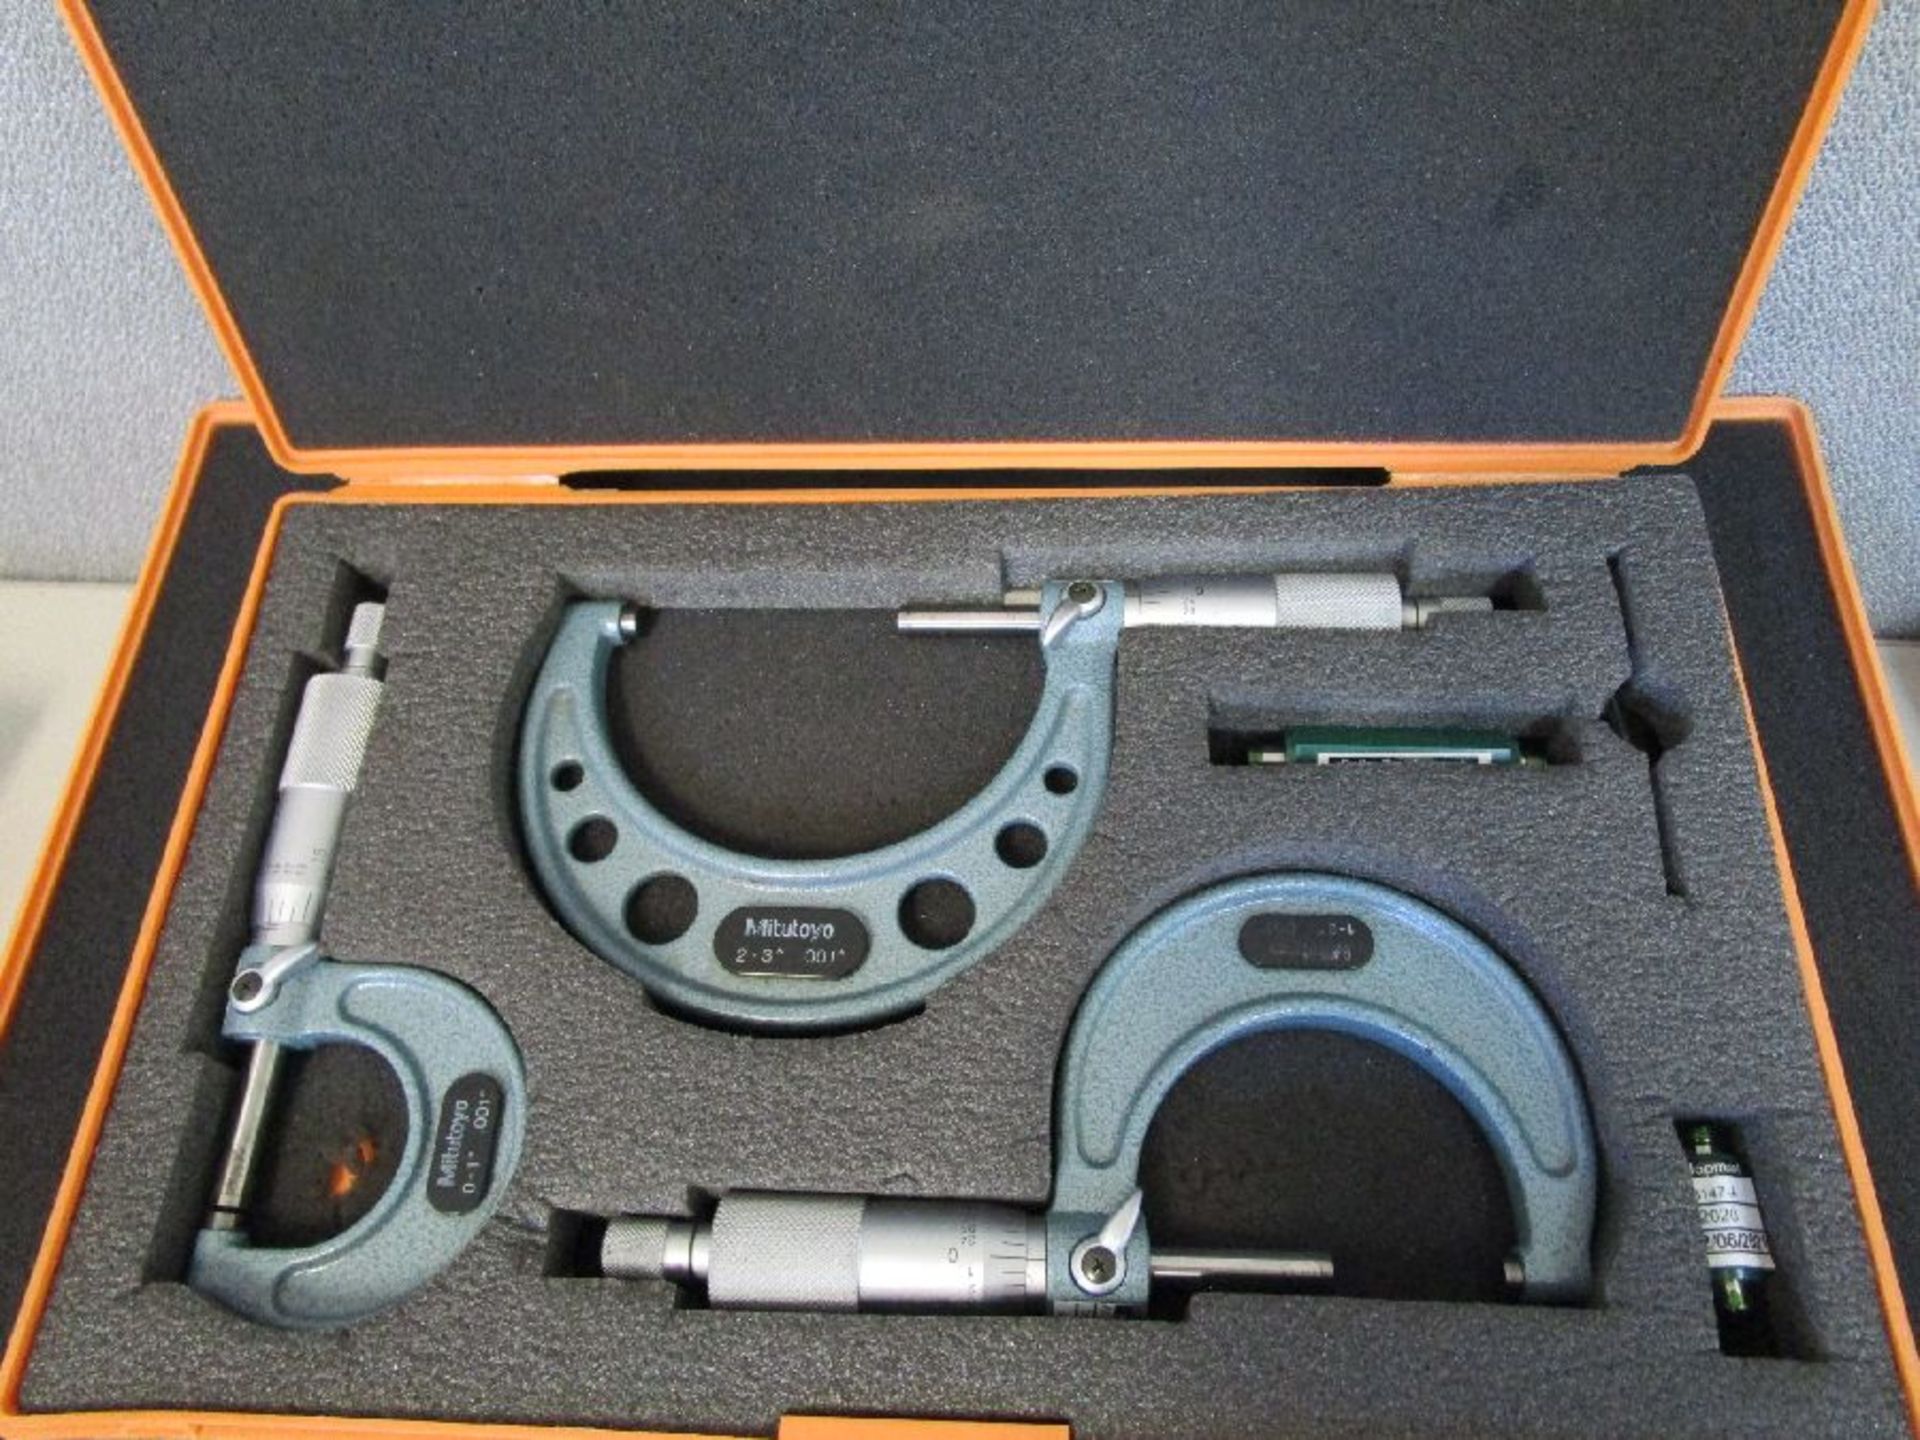 Mitutoyo Model 103-183 6""-7"" Outside Micrometer - Image 4 of 4